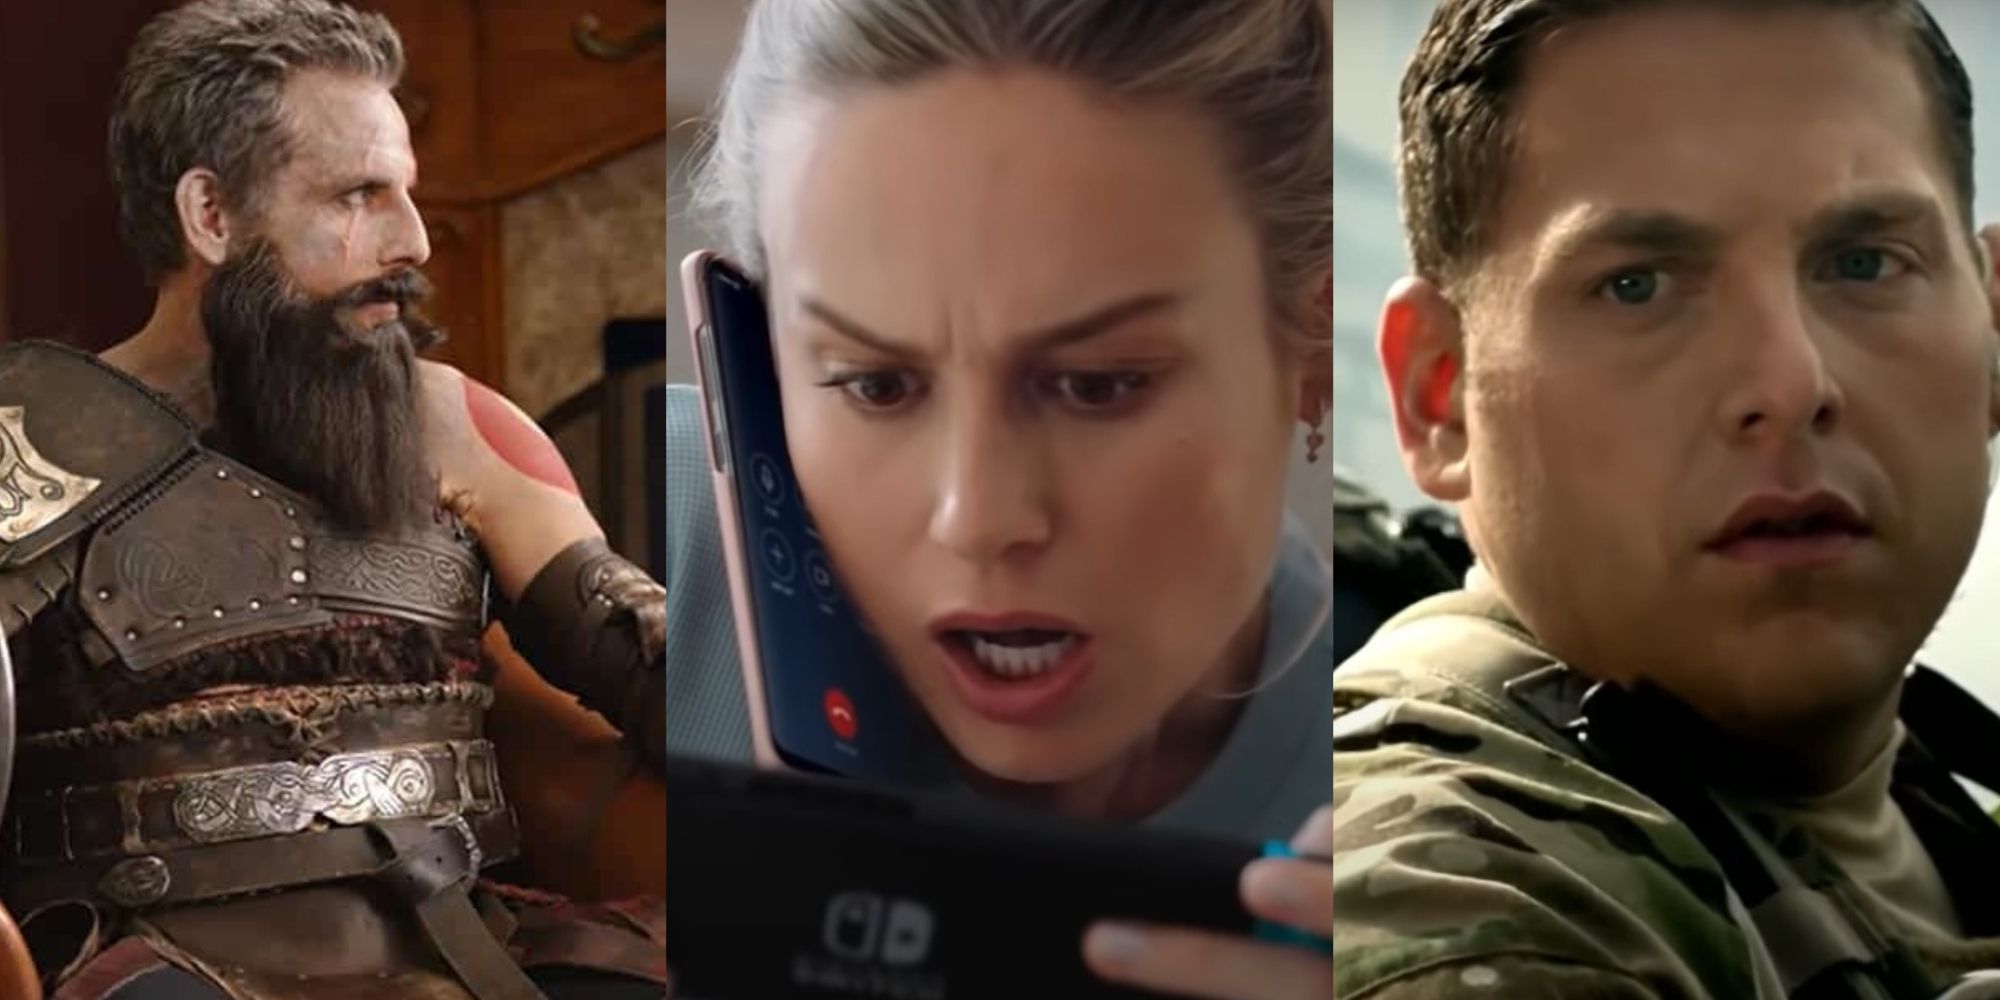 Composite of Ben Stiller (God of War), Brie Larson (Nintendo Switch), and Jonah Hill (Call of Duty: Black Ops) in video game commercials